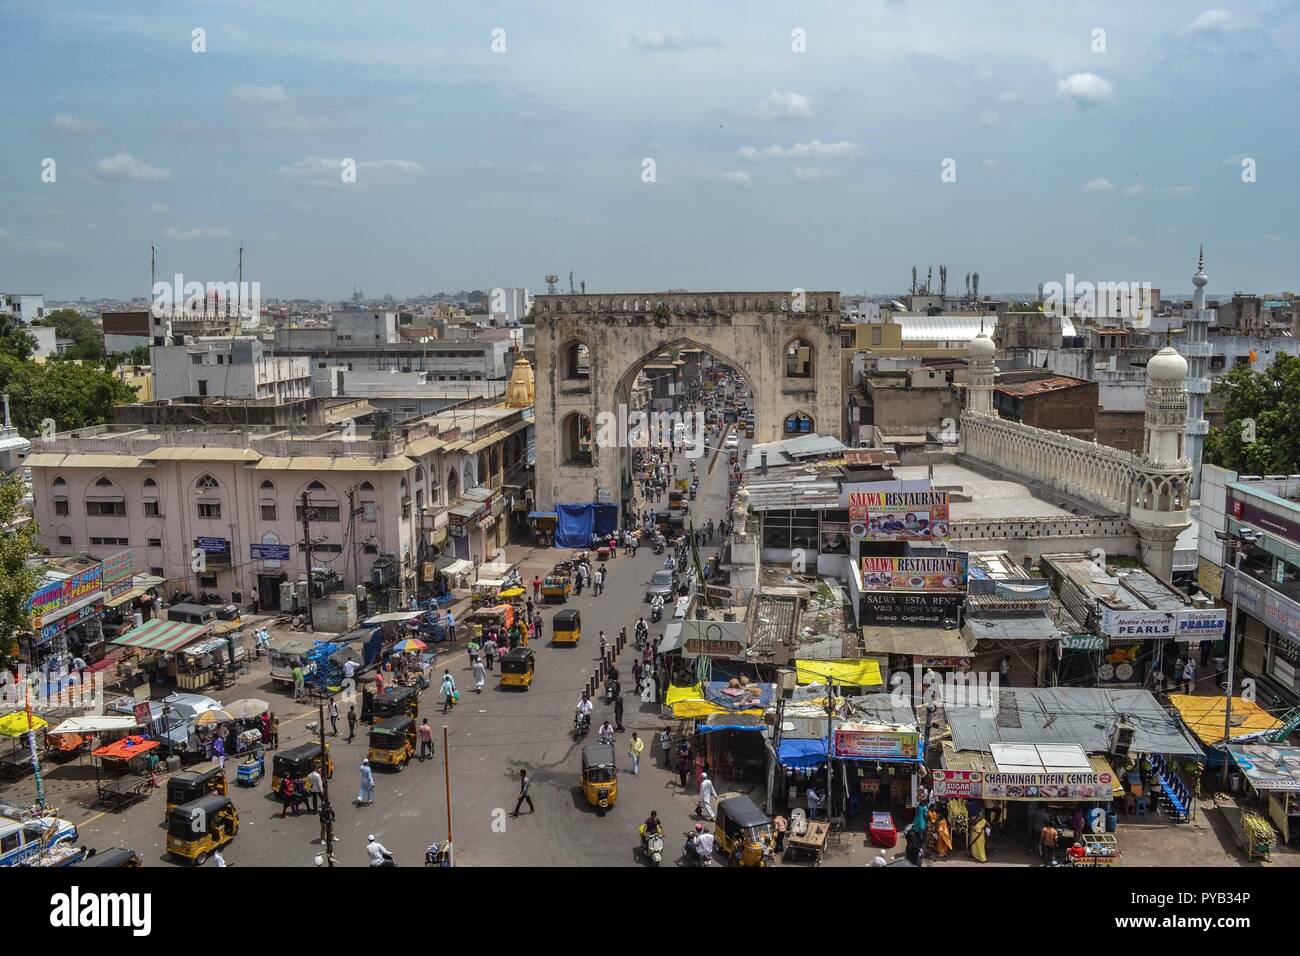 View of the market place around the Charminar/Hyderabad/India Stock Photo